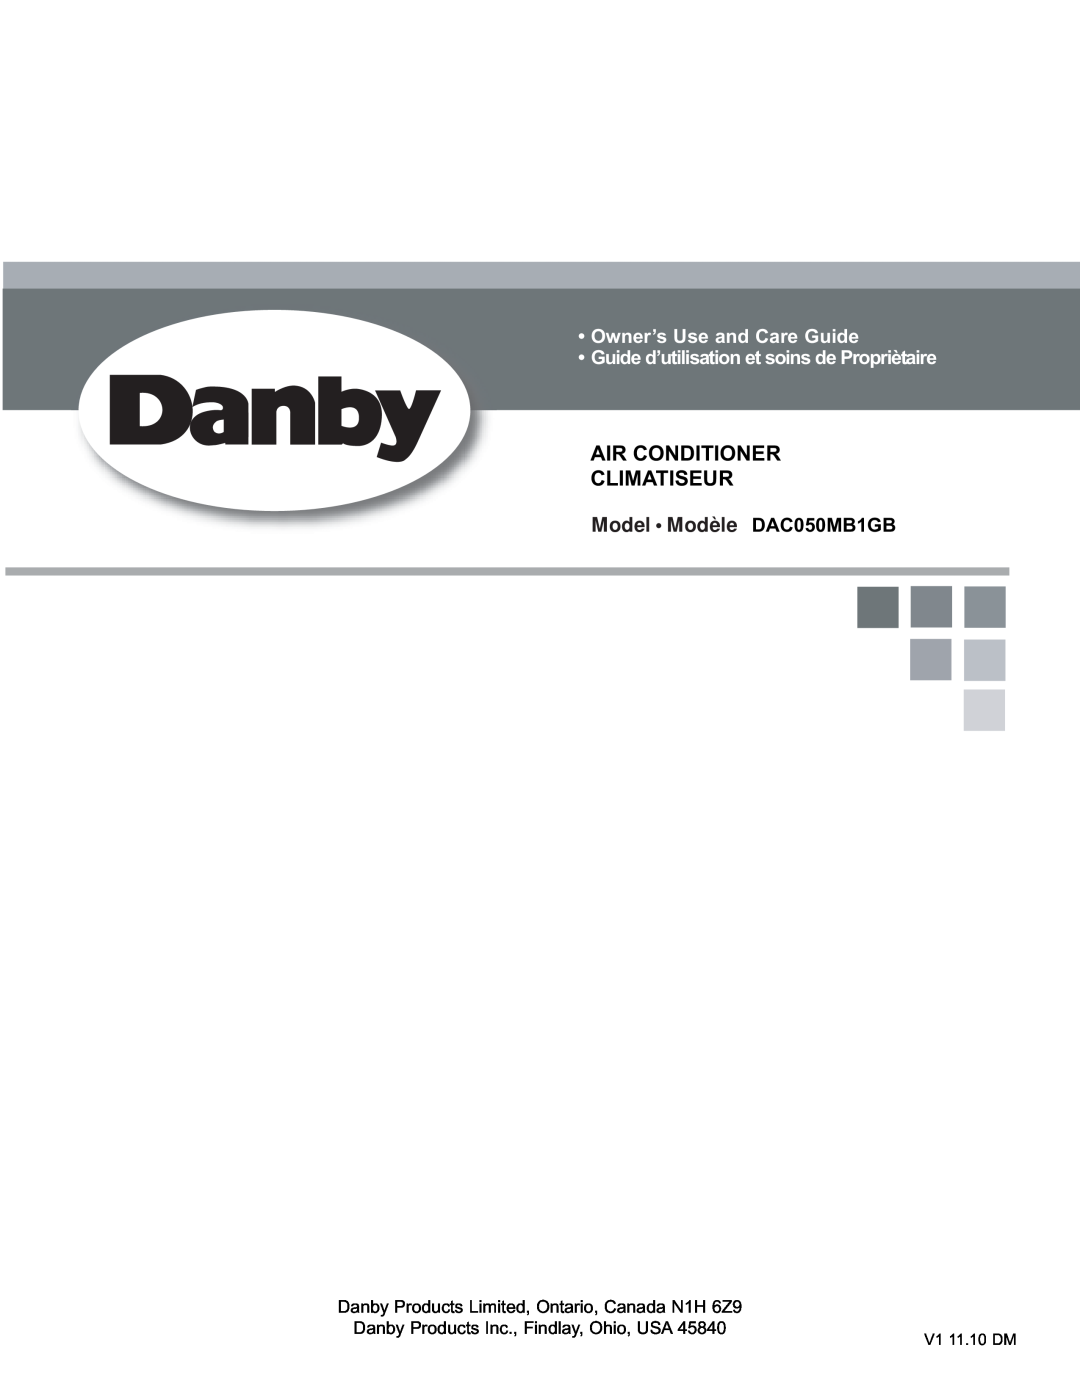 Danby manual Air Conditioner Climatiseur, Model Modèle DAC050MB1GBModelo, Owner’s Use and Care Guide, V1 11.10 DM 